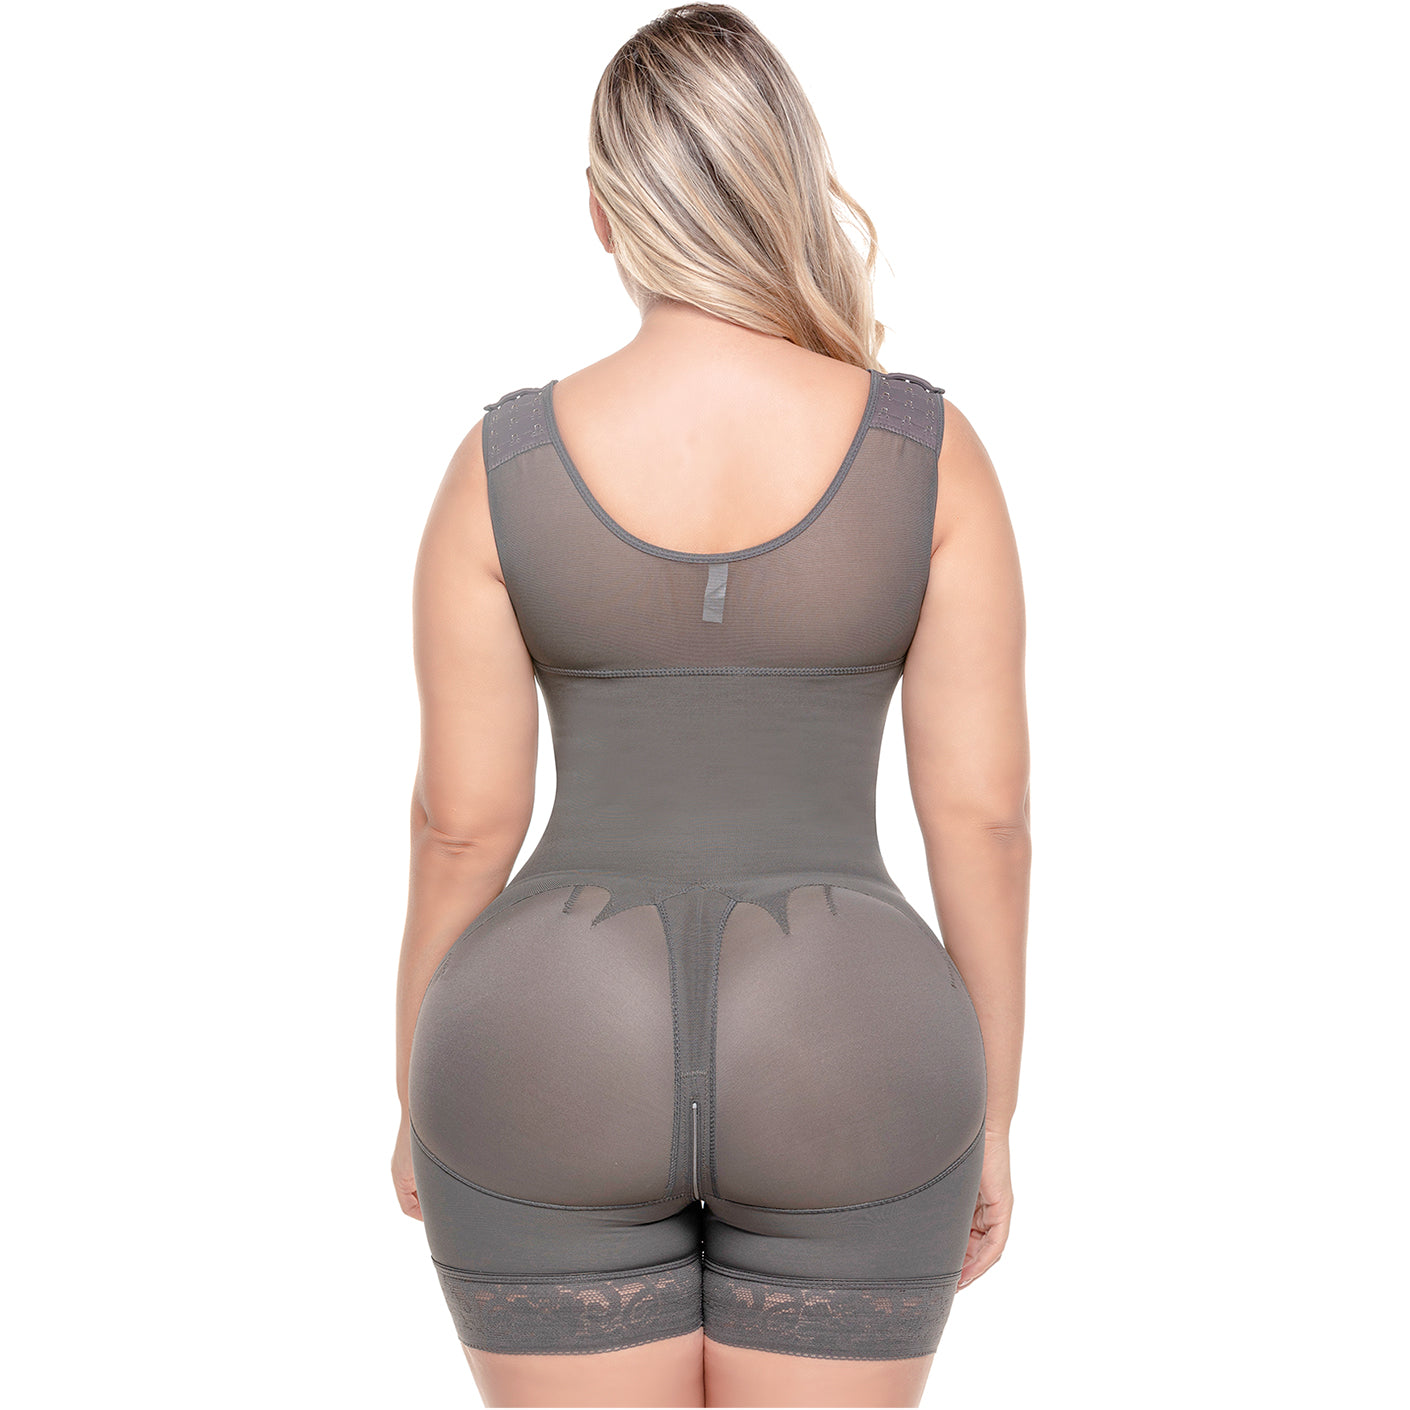 Faja Colombiana Post Quirurgica Moldeate Slimming Post Op Garment Sonryse  052BF